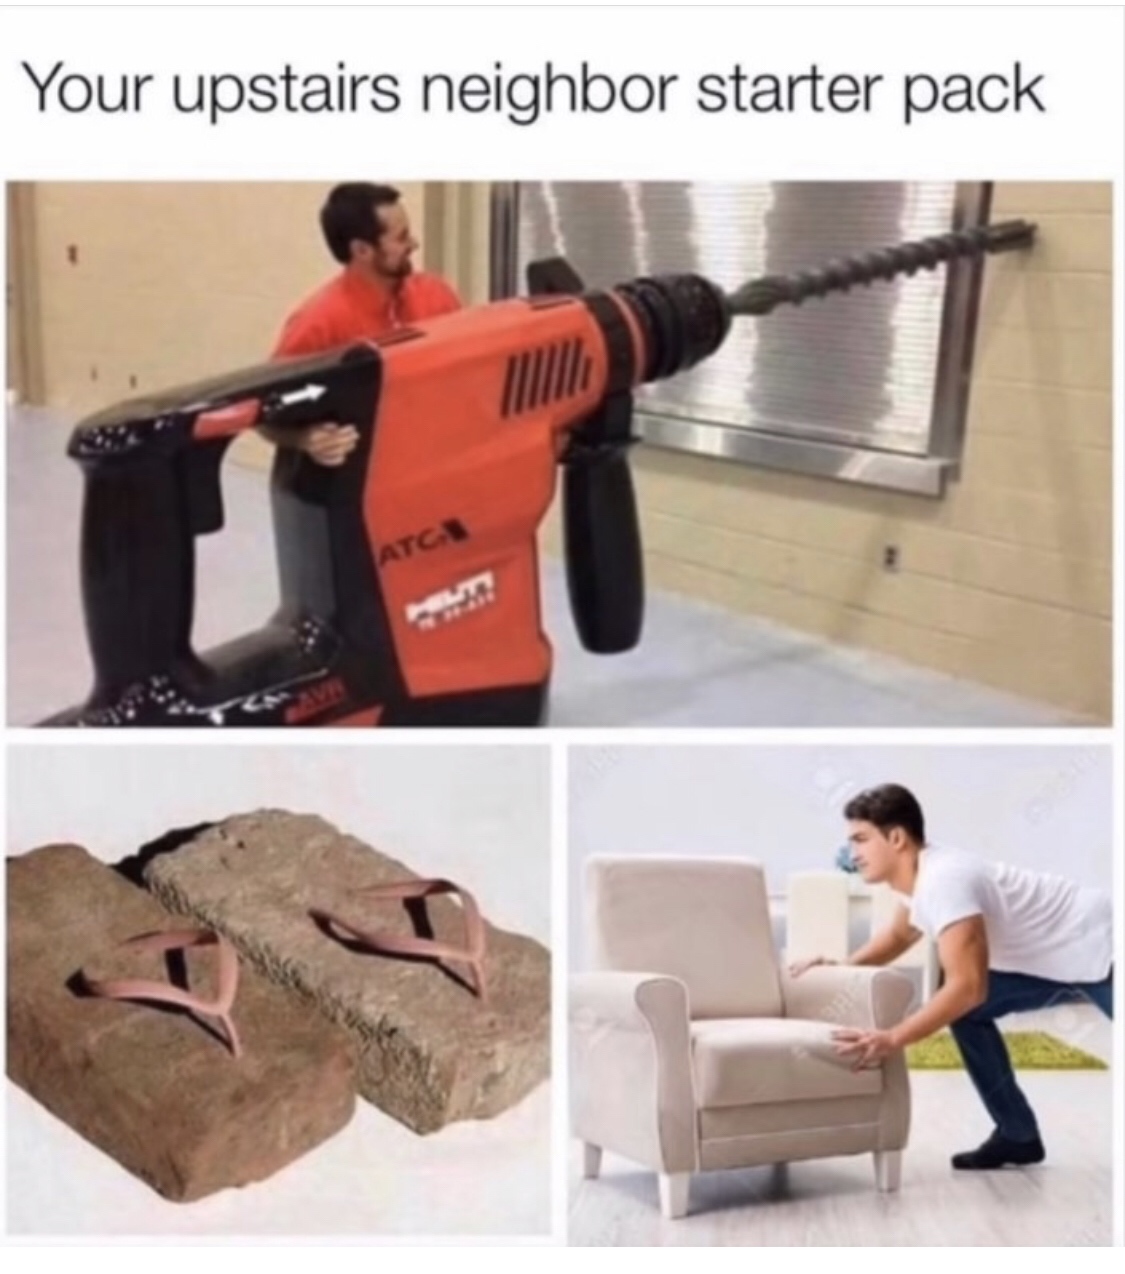 your upstairs neighbor starter pack meme - Your upstairs neighbor starter pack Atgs